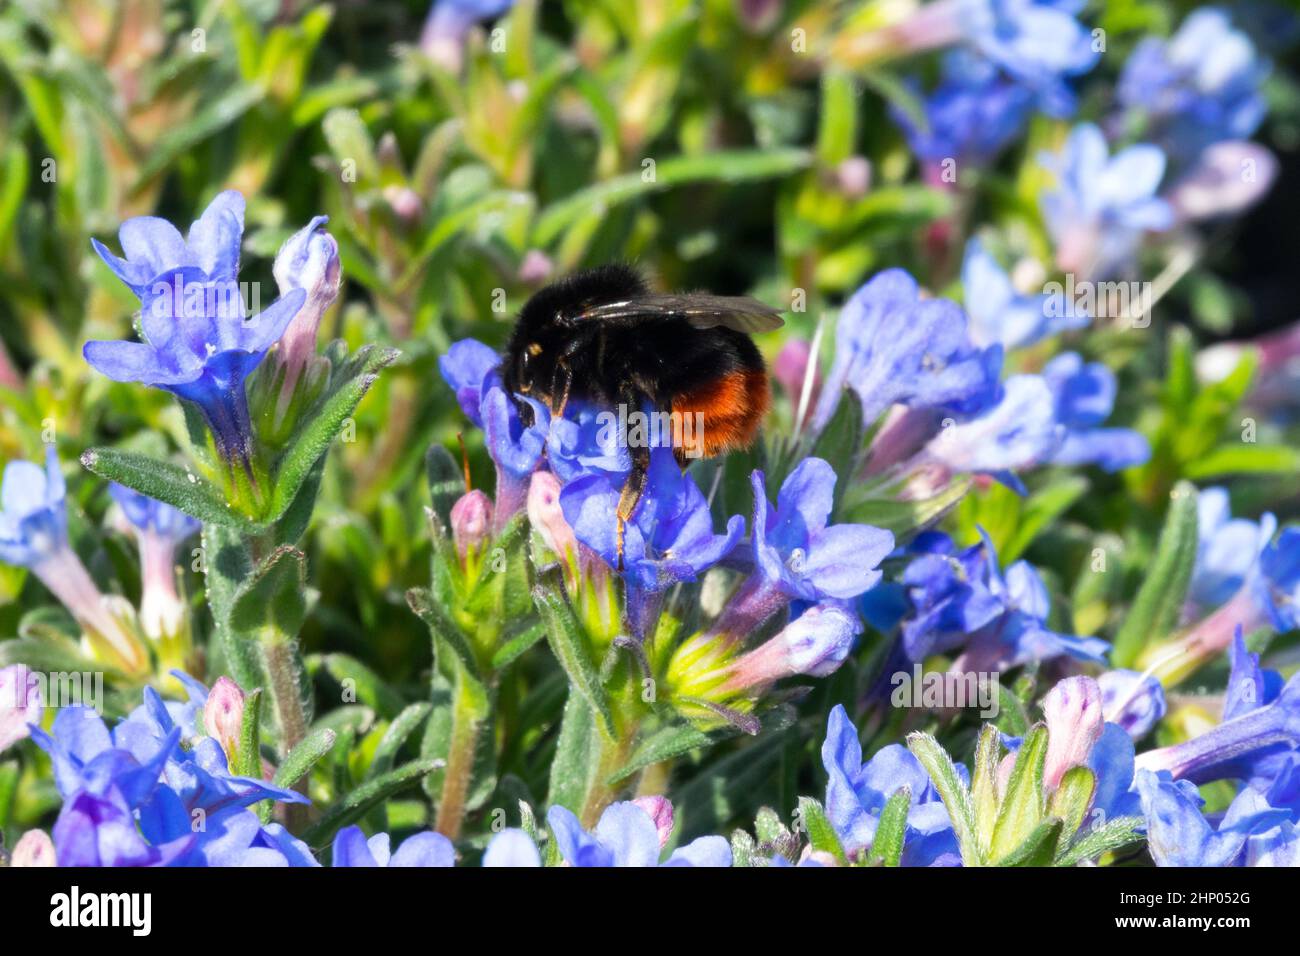 Red-Tailed Bumblebee on flower Lithodora diffusa Heavenly Blue Stock Photo